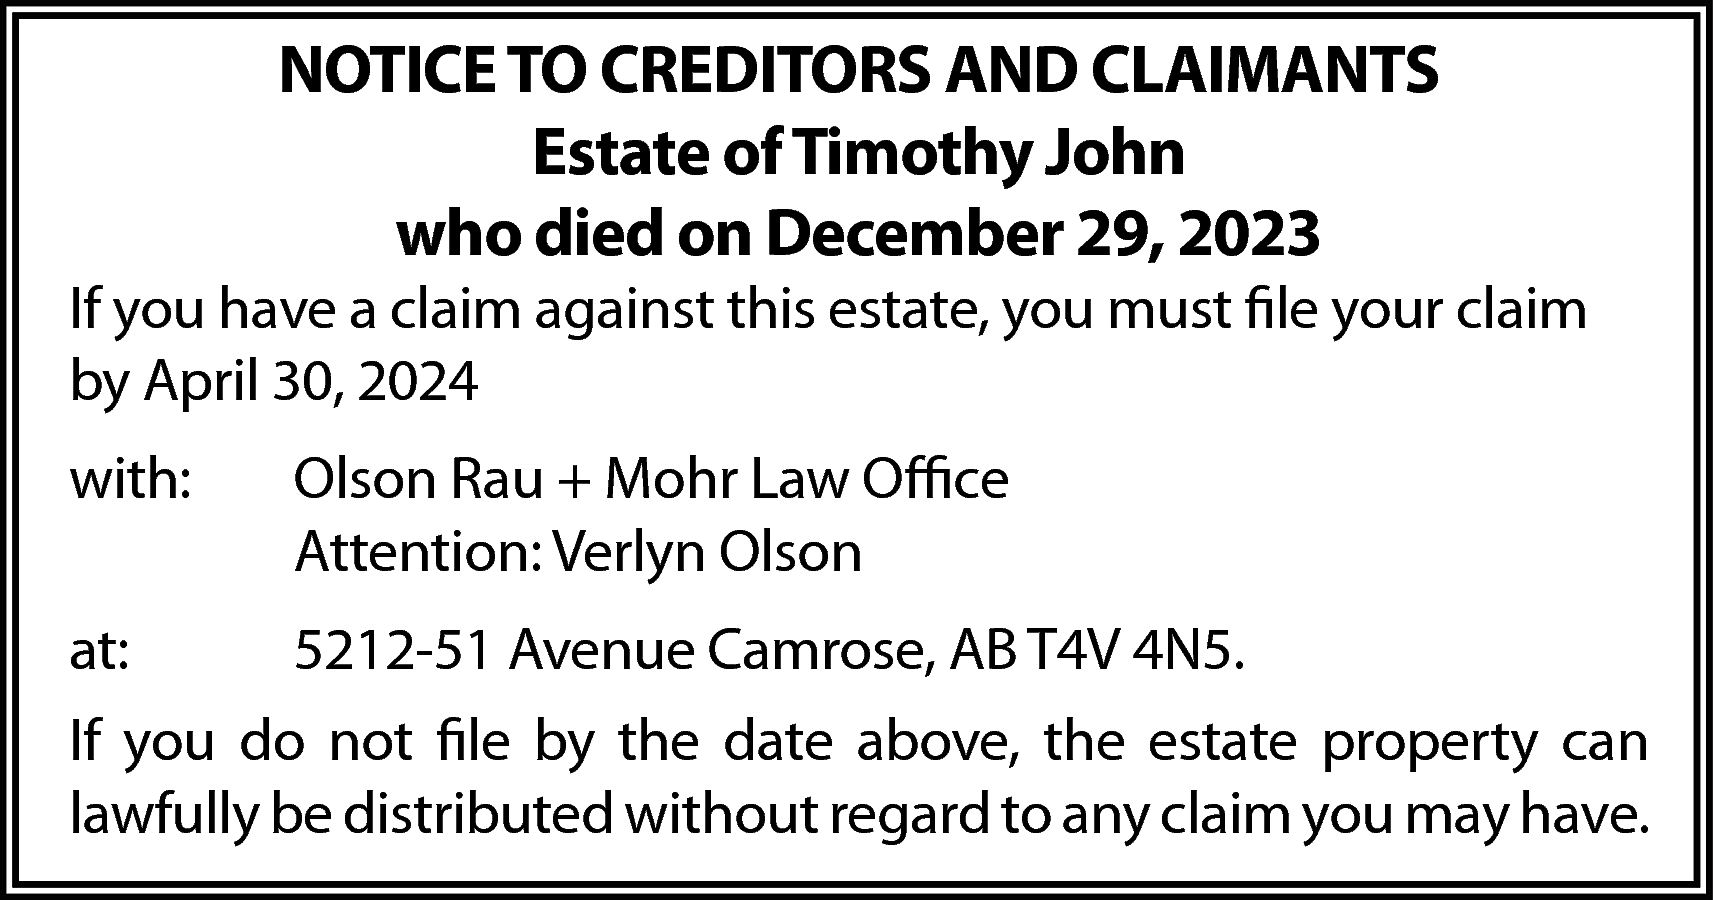 NOTICE TO CREDITORS AND CLAIMANTS  NOTICE TO CREDITORS AND CLAIMANTS  Estate of Timothy John  who died on December 29, 2023    If you have a claim against this estate, you must file your claim  by April 30, 2024  with:    Olson Rau + Mohr Law Office  Attention: Verlyn Olson    at:    5212-51 Avenue Camrose, AB T4V 4N5.    If you do not file by the date above, the estate property can  lawfully be distributed without regard to any claim you may have.    